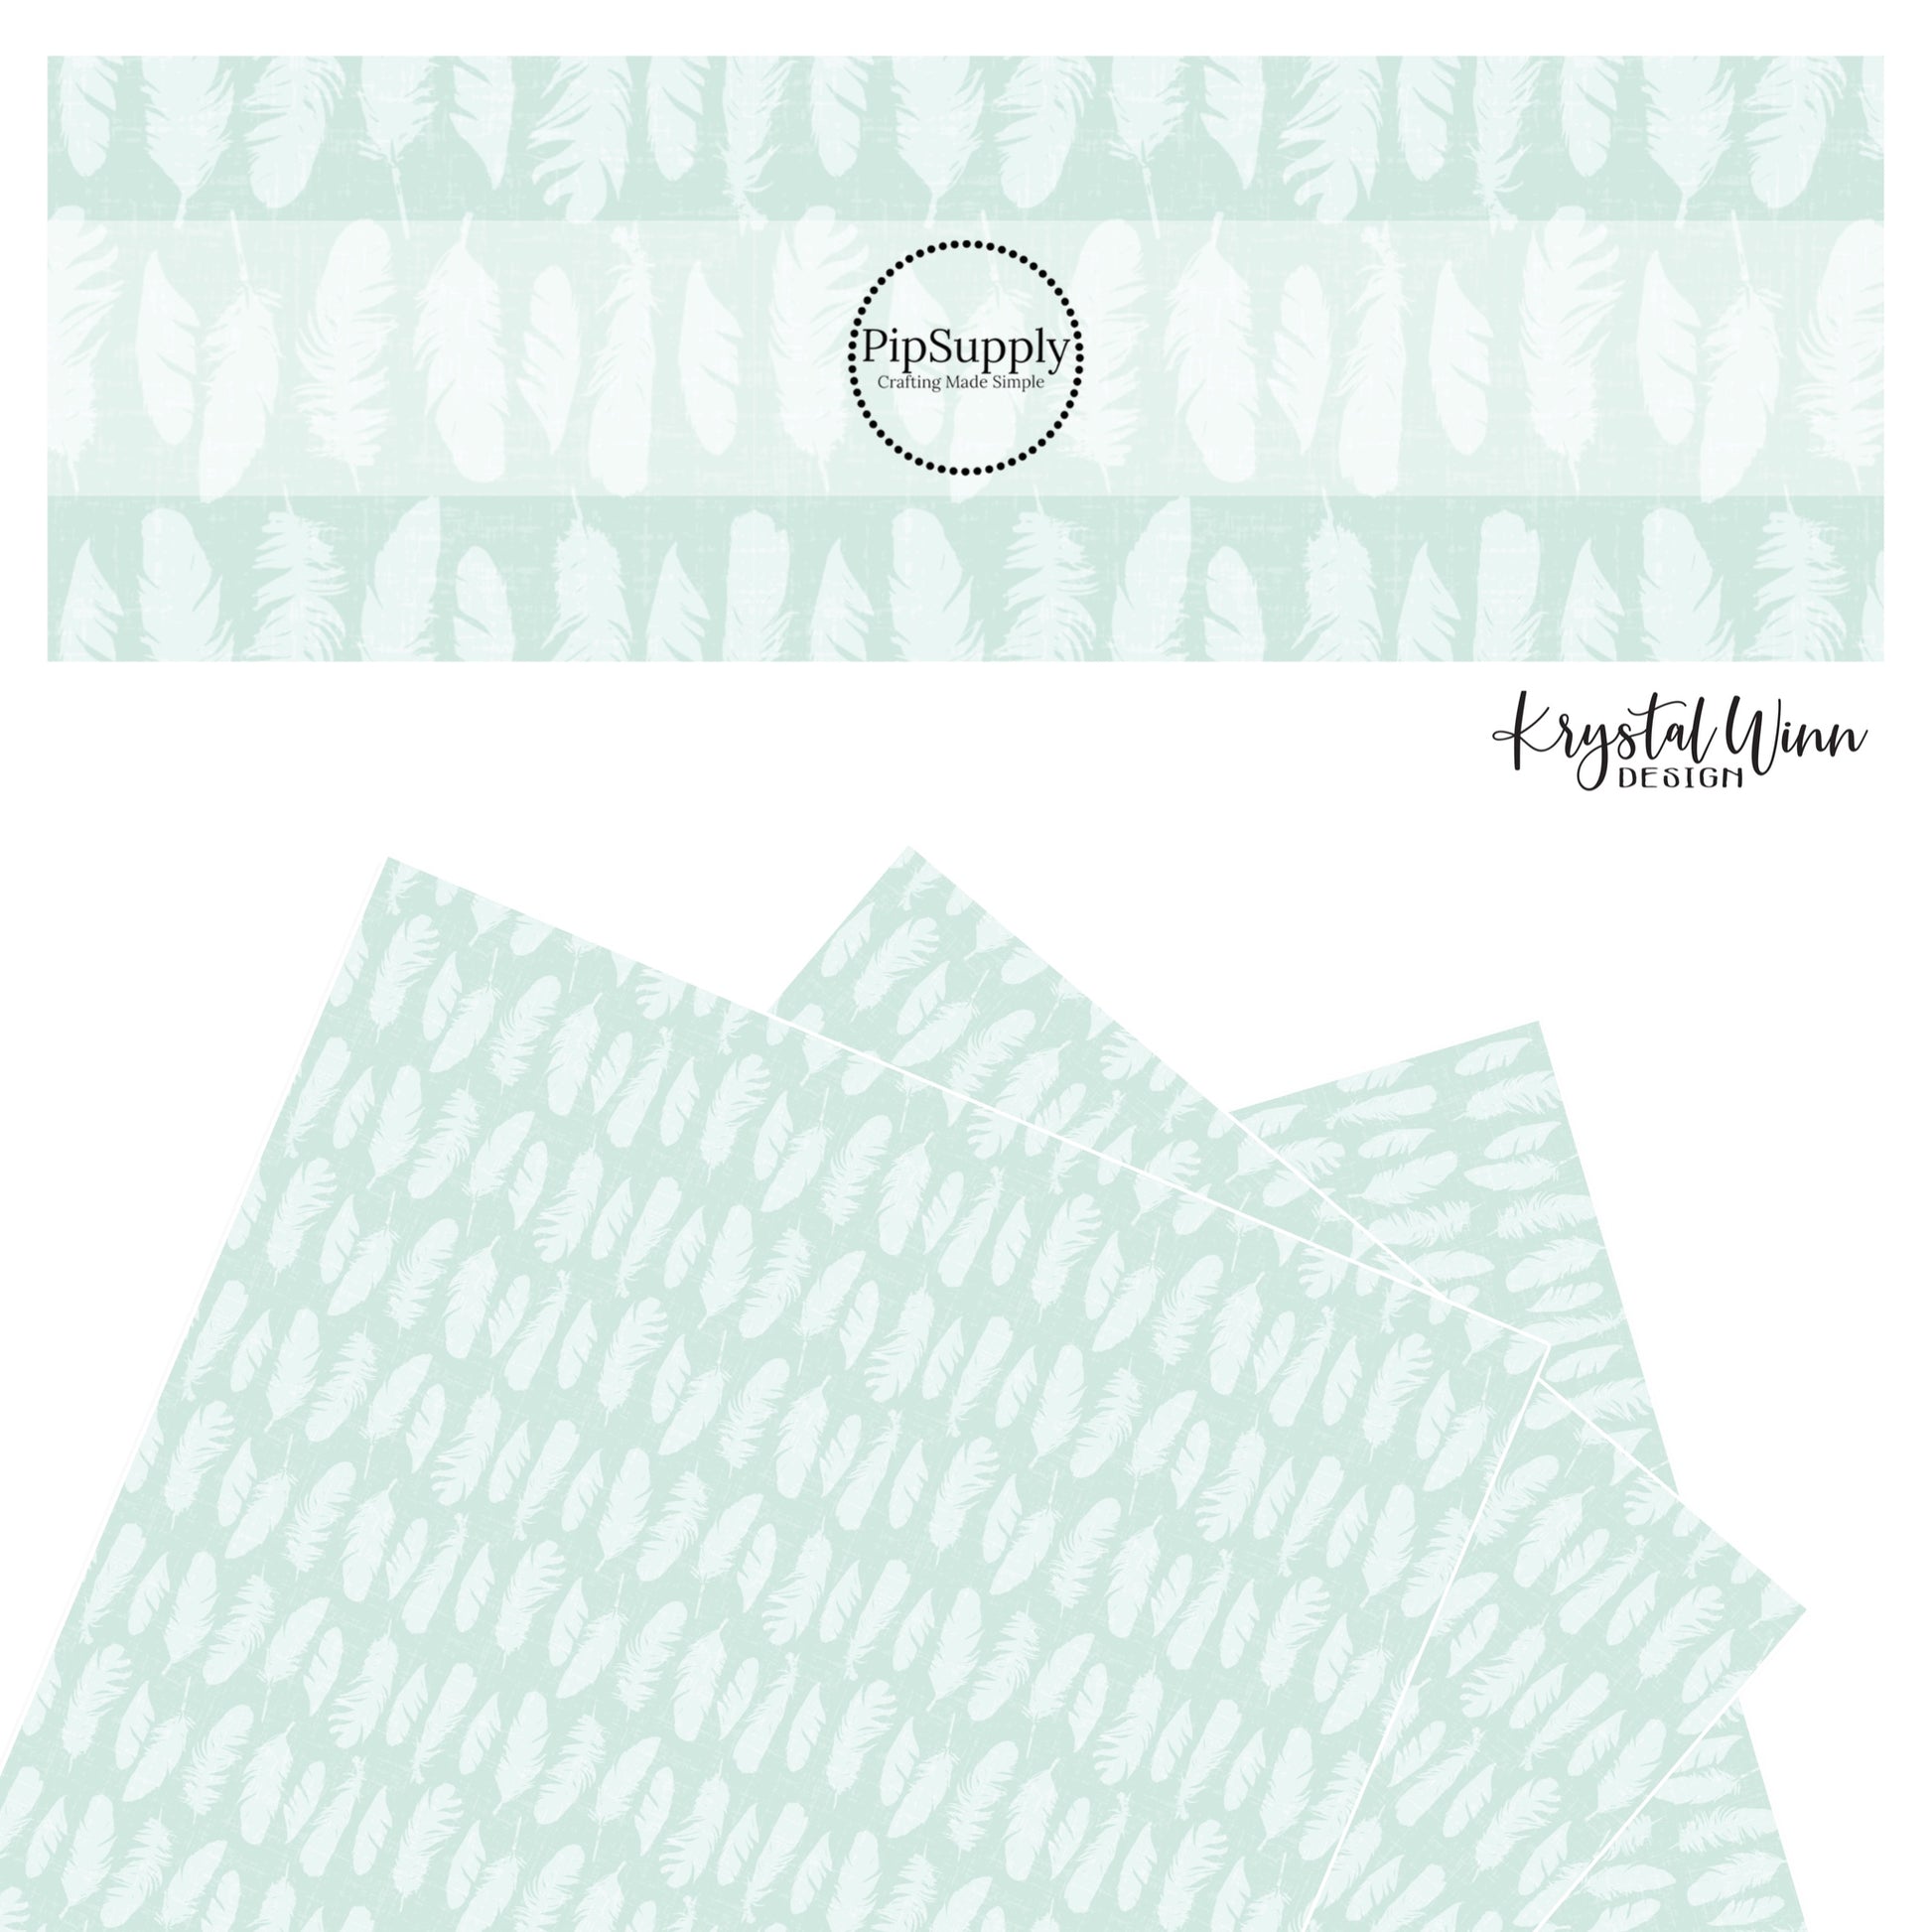 White feathers on a distressed aqua faux leather sheets